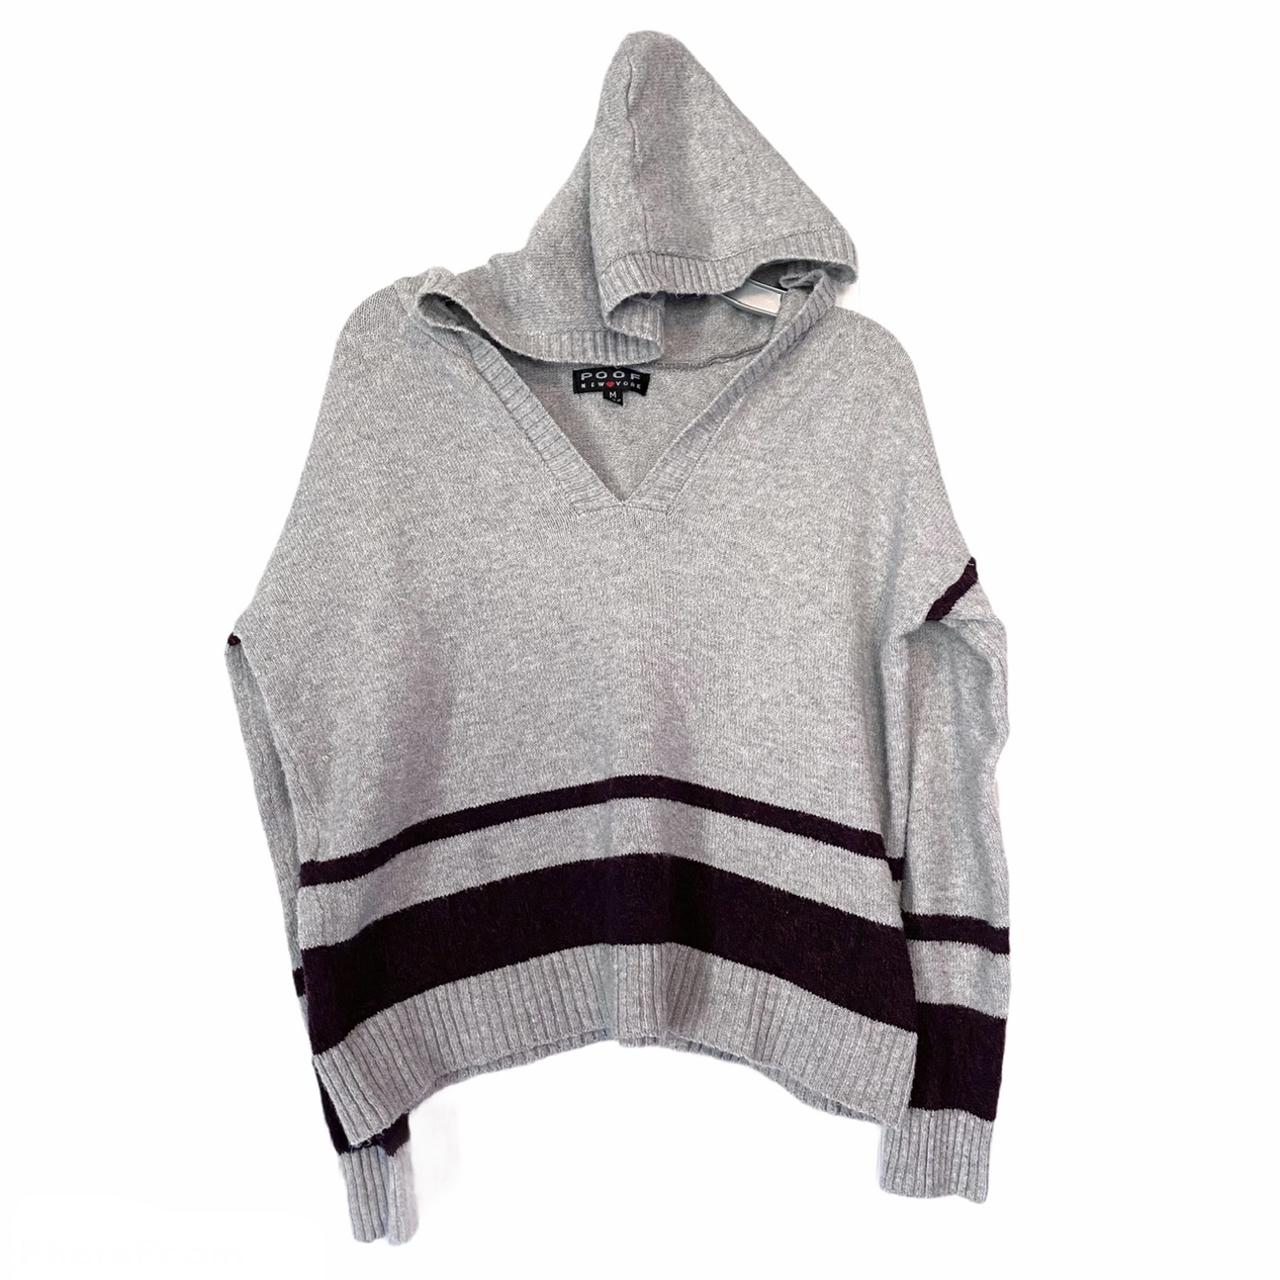 Product Image 1 - This is a sweater from